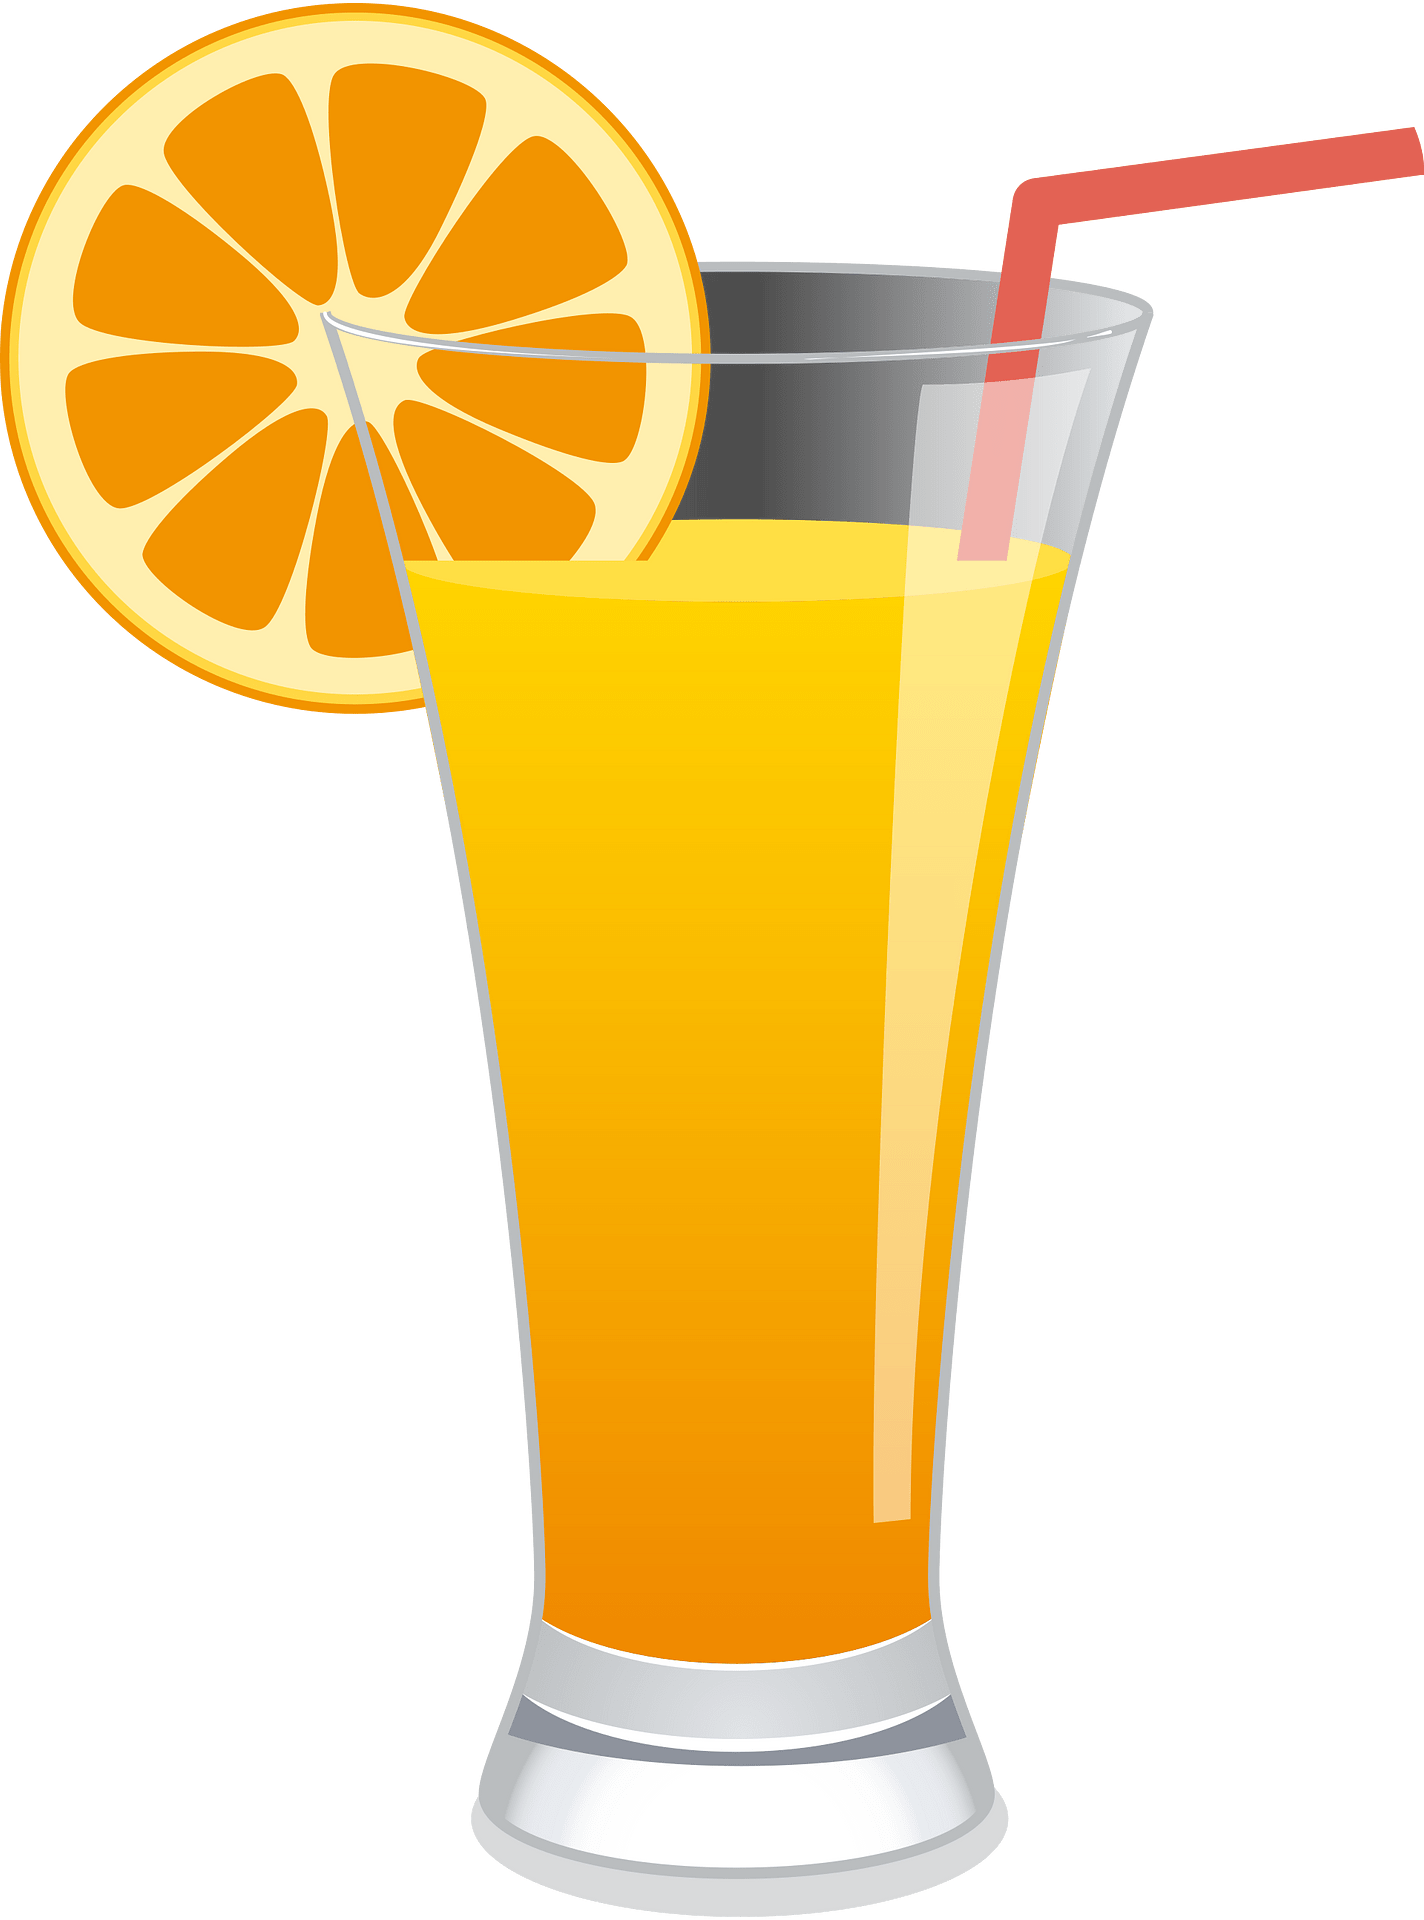 Soft Drink Cliparts png images | PNGEgg - Clip Art Library